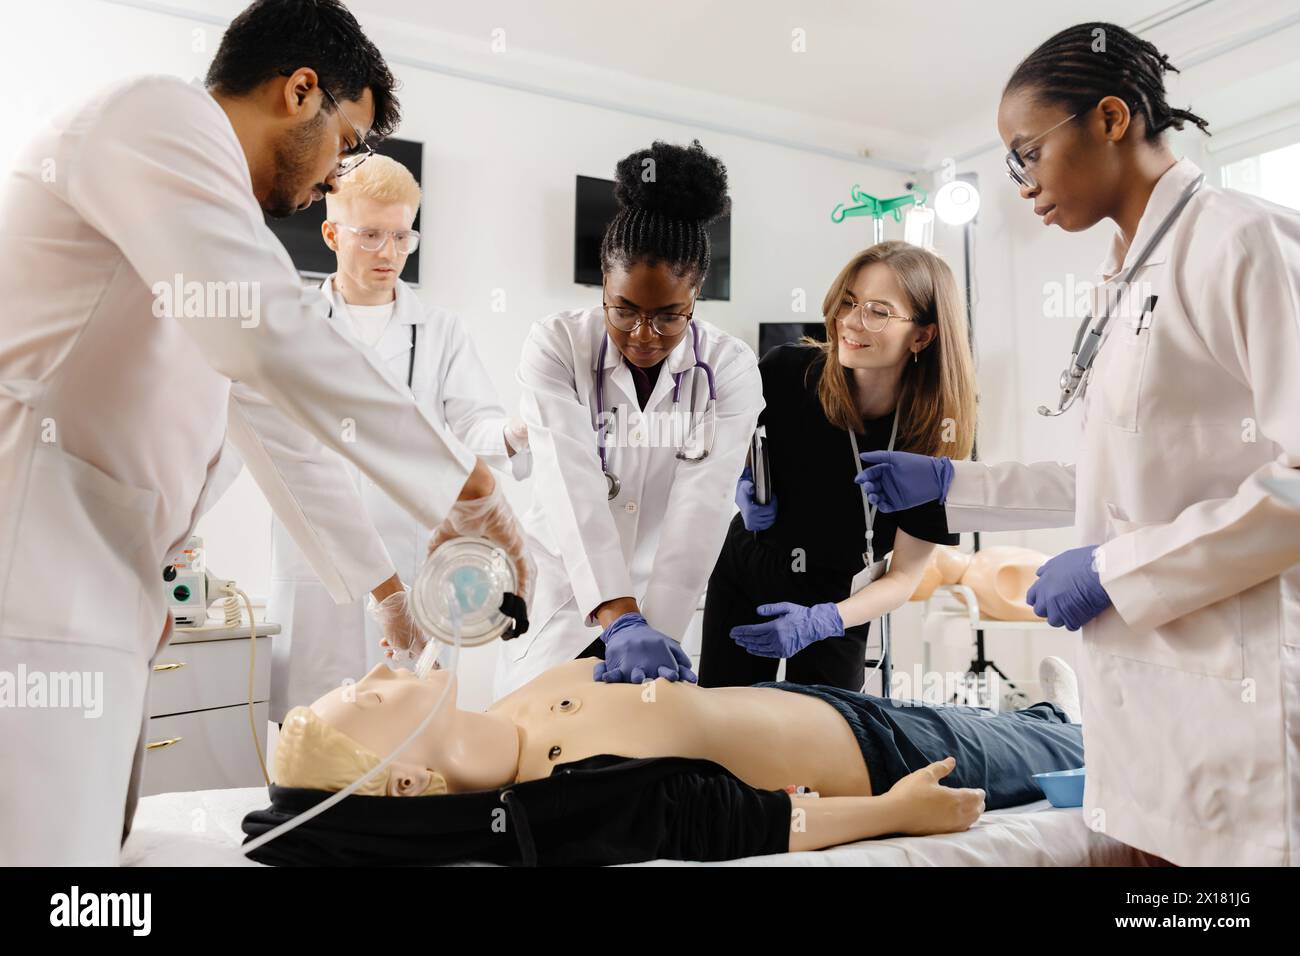 A group of medical personnel is gathered around a CPR training dummy, practicing life-saving techniques in a medical simulation setting. Stock Photo